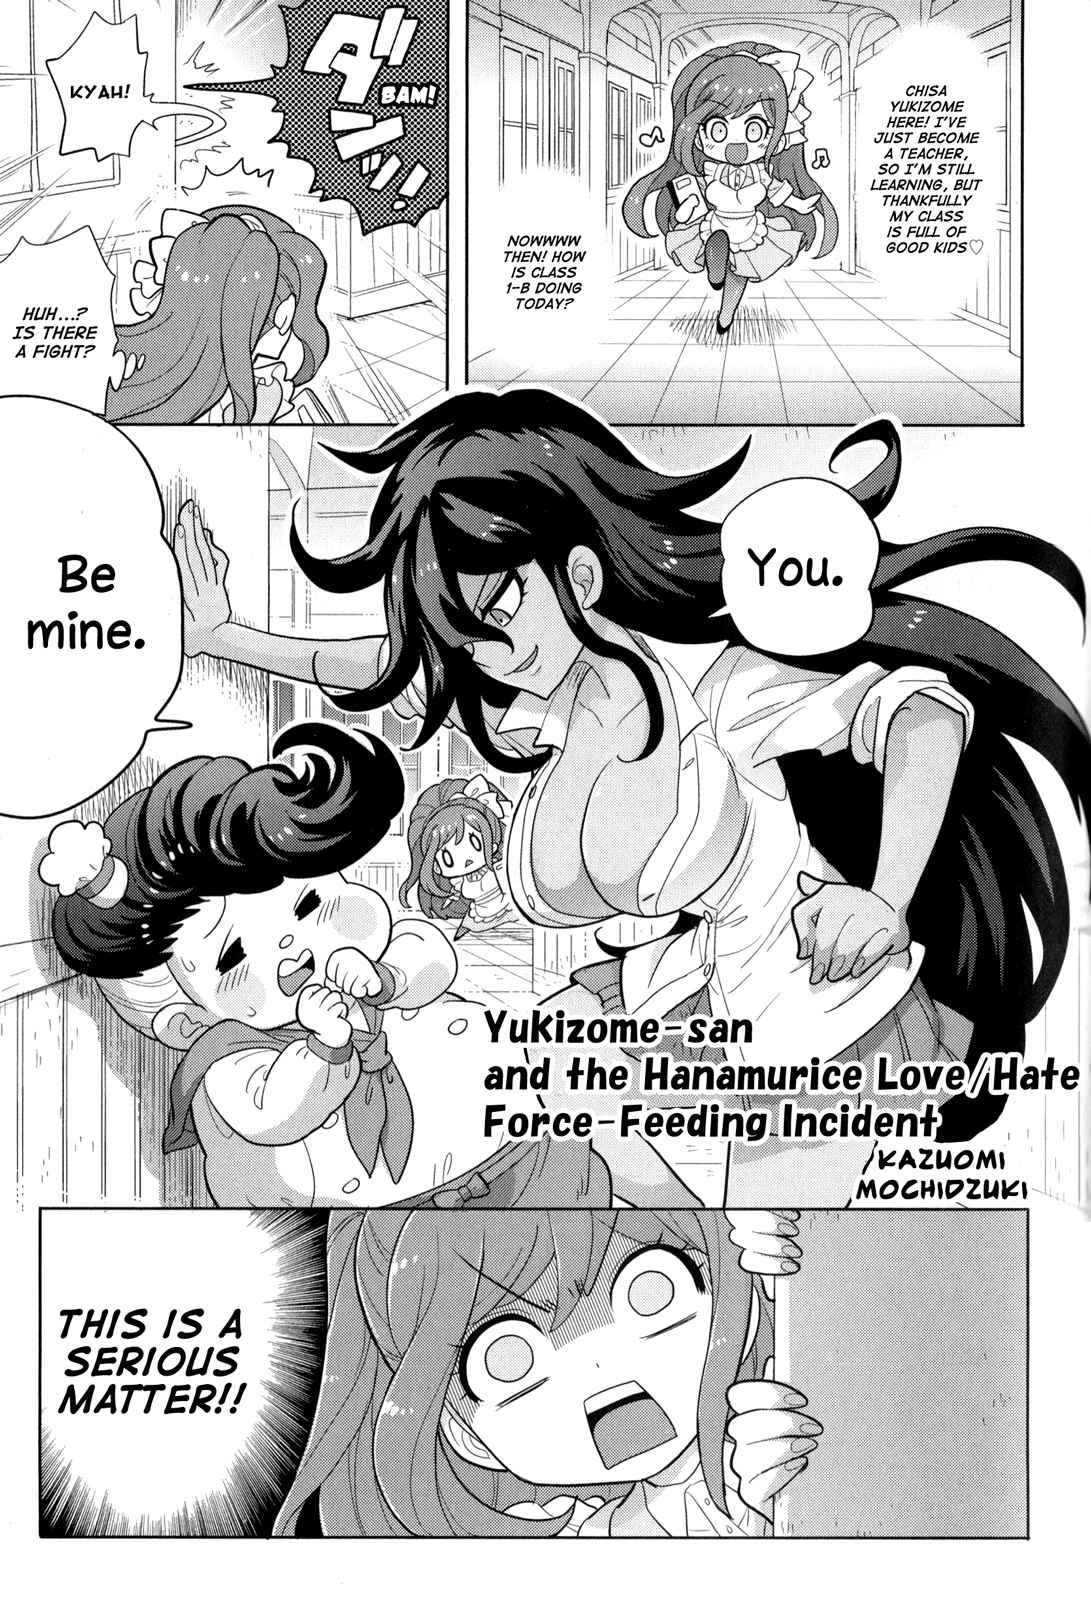 Danganronpa 3: The End of Hope's Peak Academy Future Arc & Despair Arc Comic Anthology (DNA Media) Vol. 1 Ch. 11 Yukizome san and the Hanamurice Love/Hate Force Feeding Incident by Kazuomi Mochidz